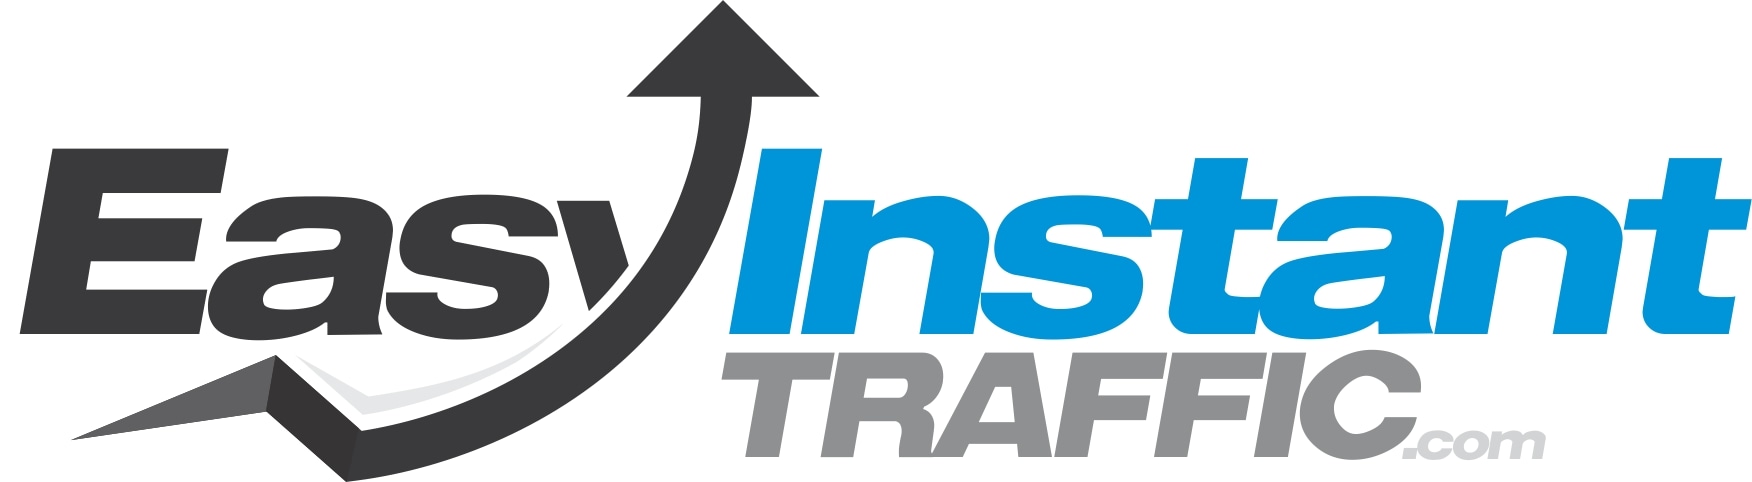 Easy Instant Traffic promo codes